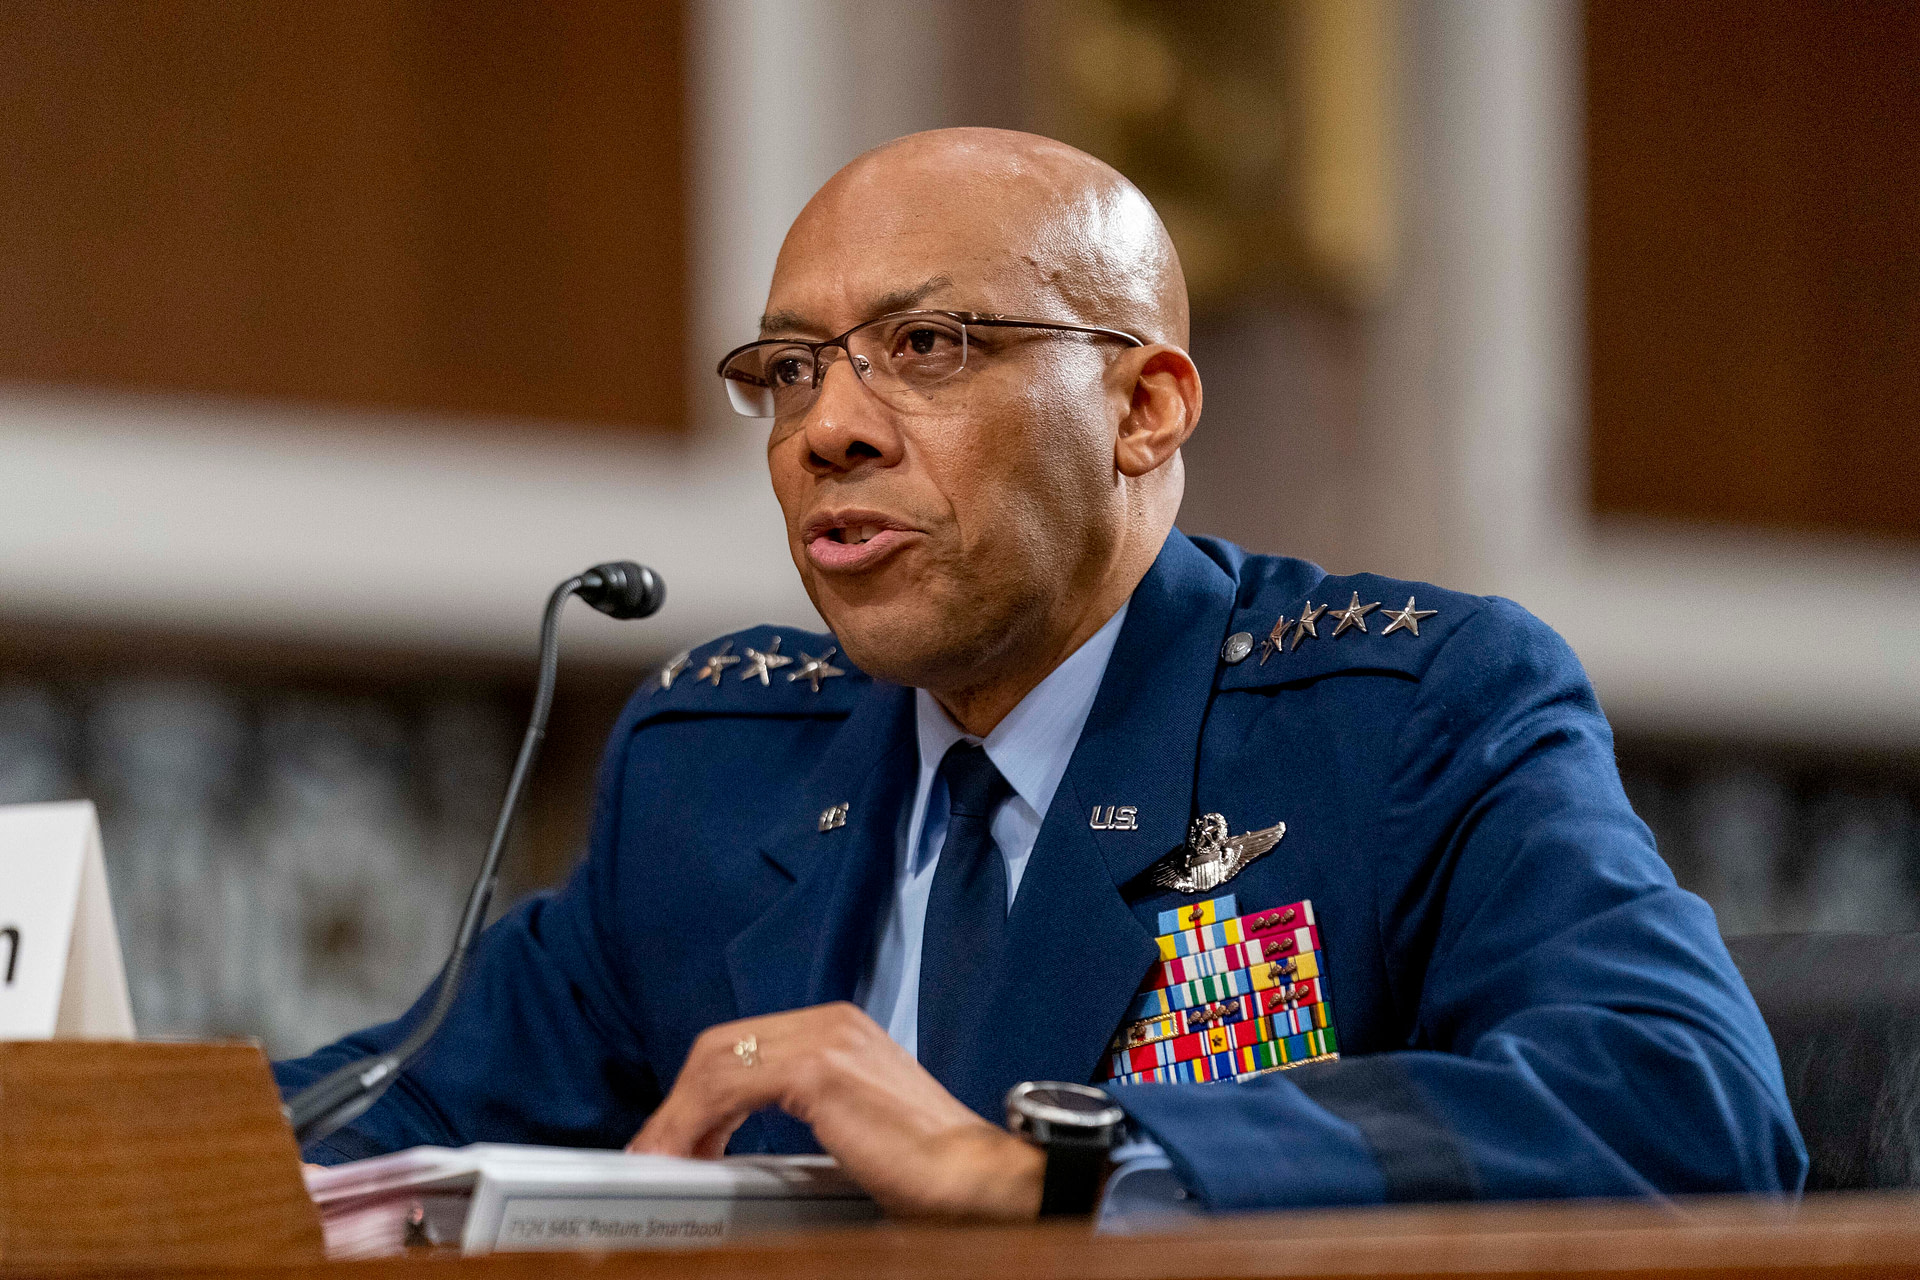 Biden is expected to tap Air Force chief to be nation’s next top military officer